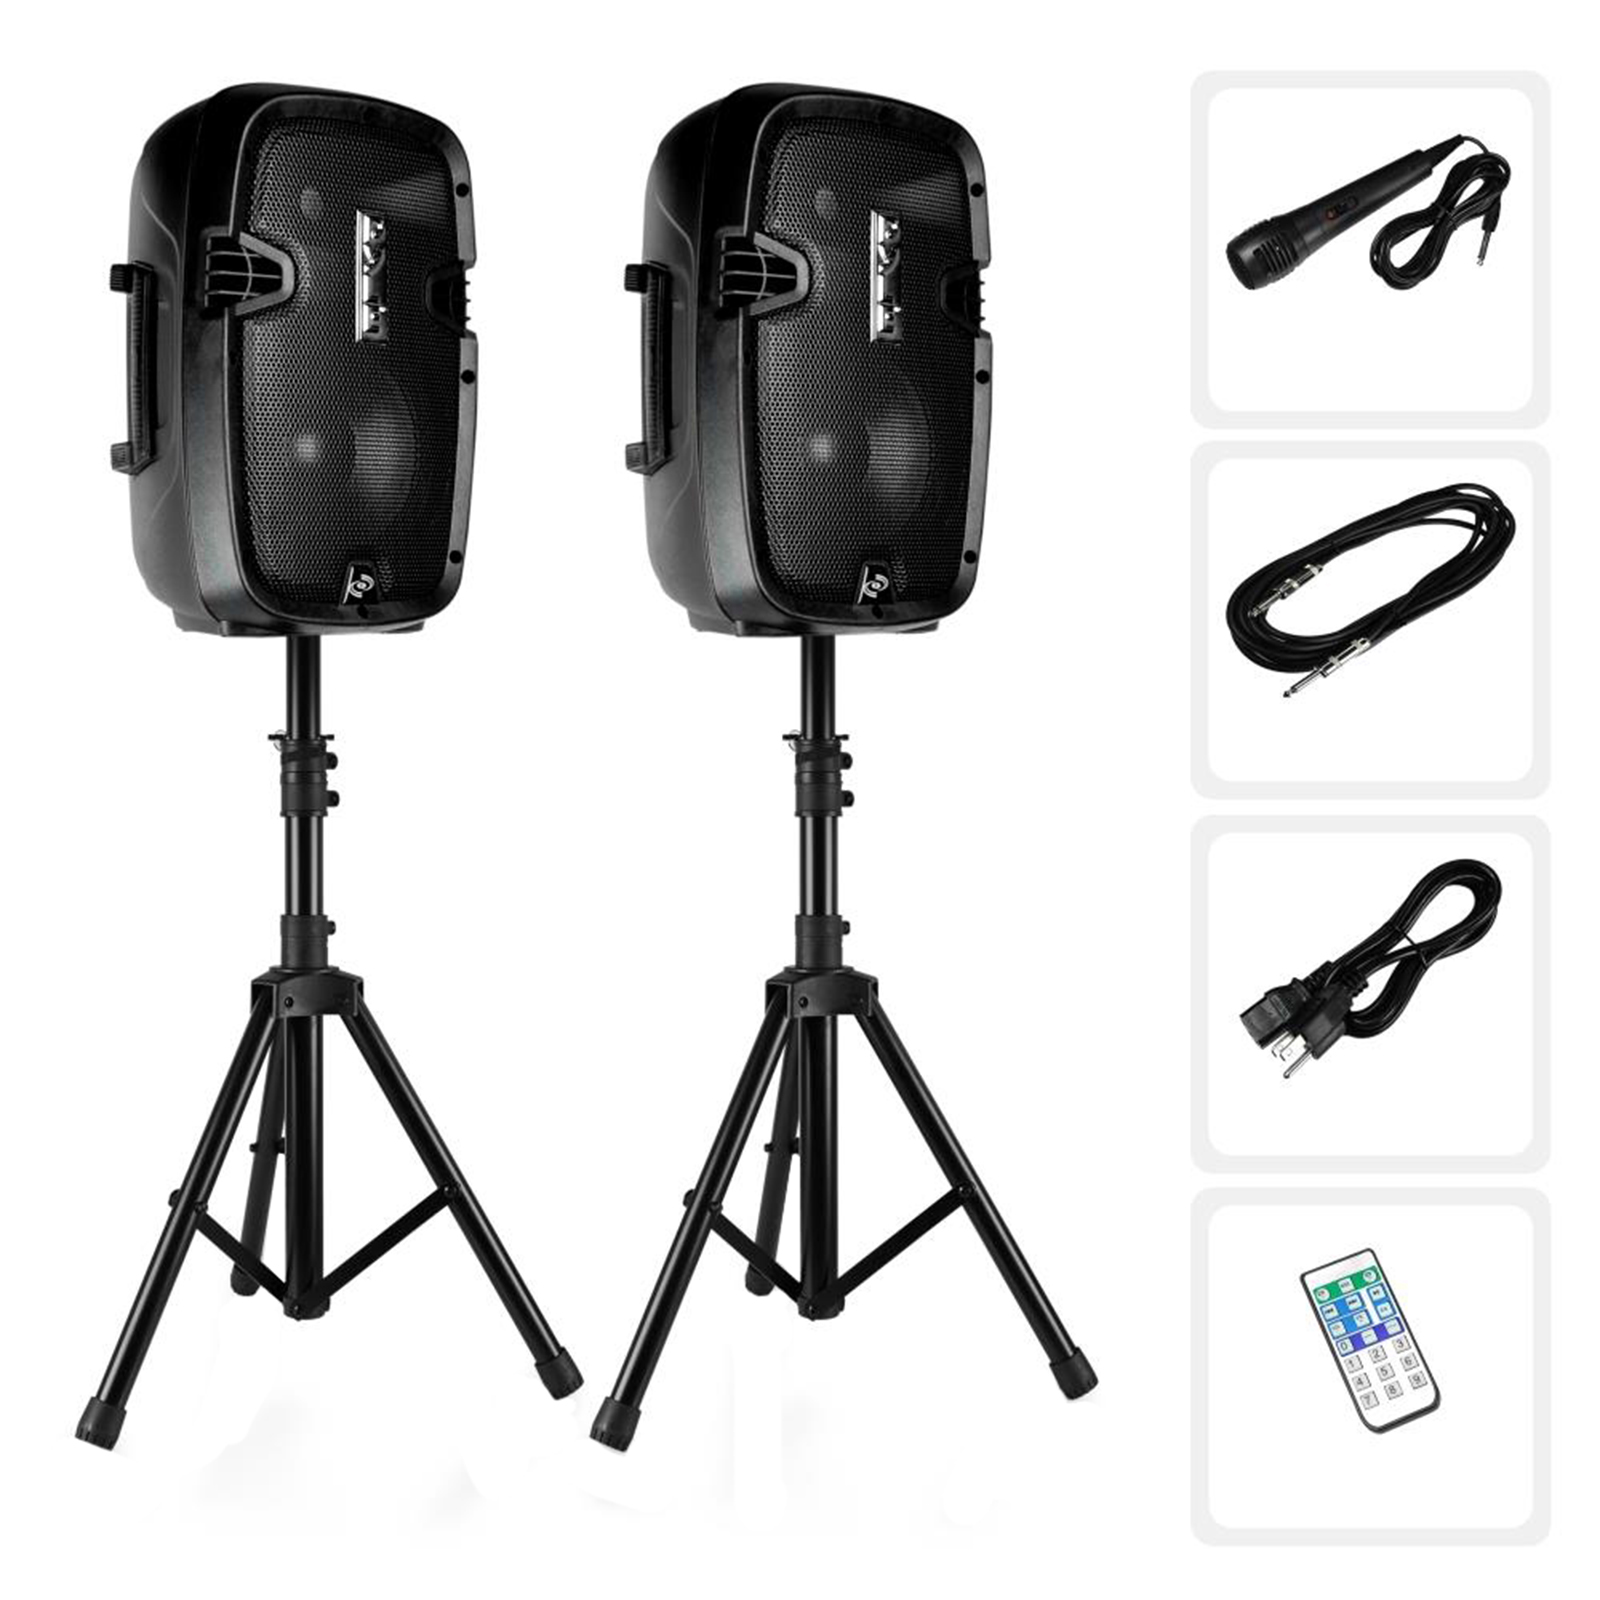 Active + Passive PA Speaker System Kit - Dual Loudspeaker Sound Package, 8" Subwoofers, BT Wireless Streaming, Includes (2) Speaker Stands, Wired Microphone, Remote Control, 700 Watt - image 1 of 1